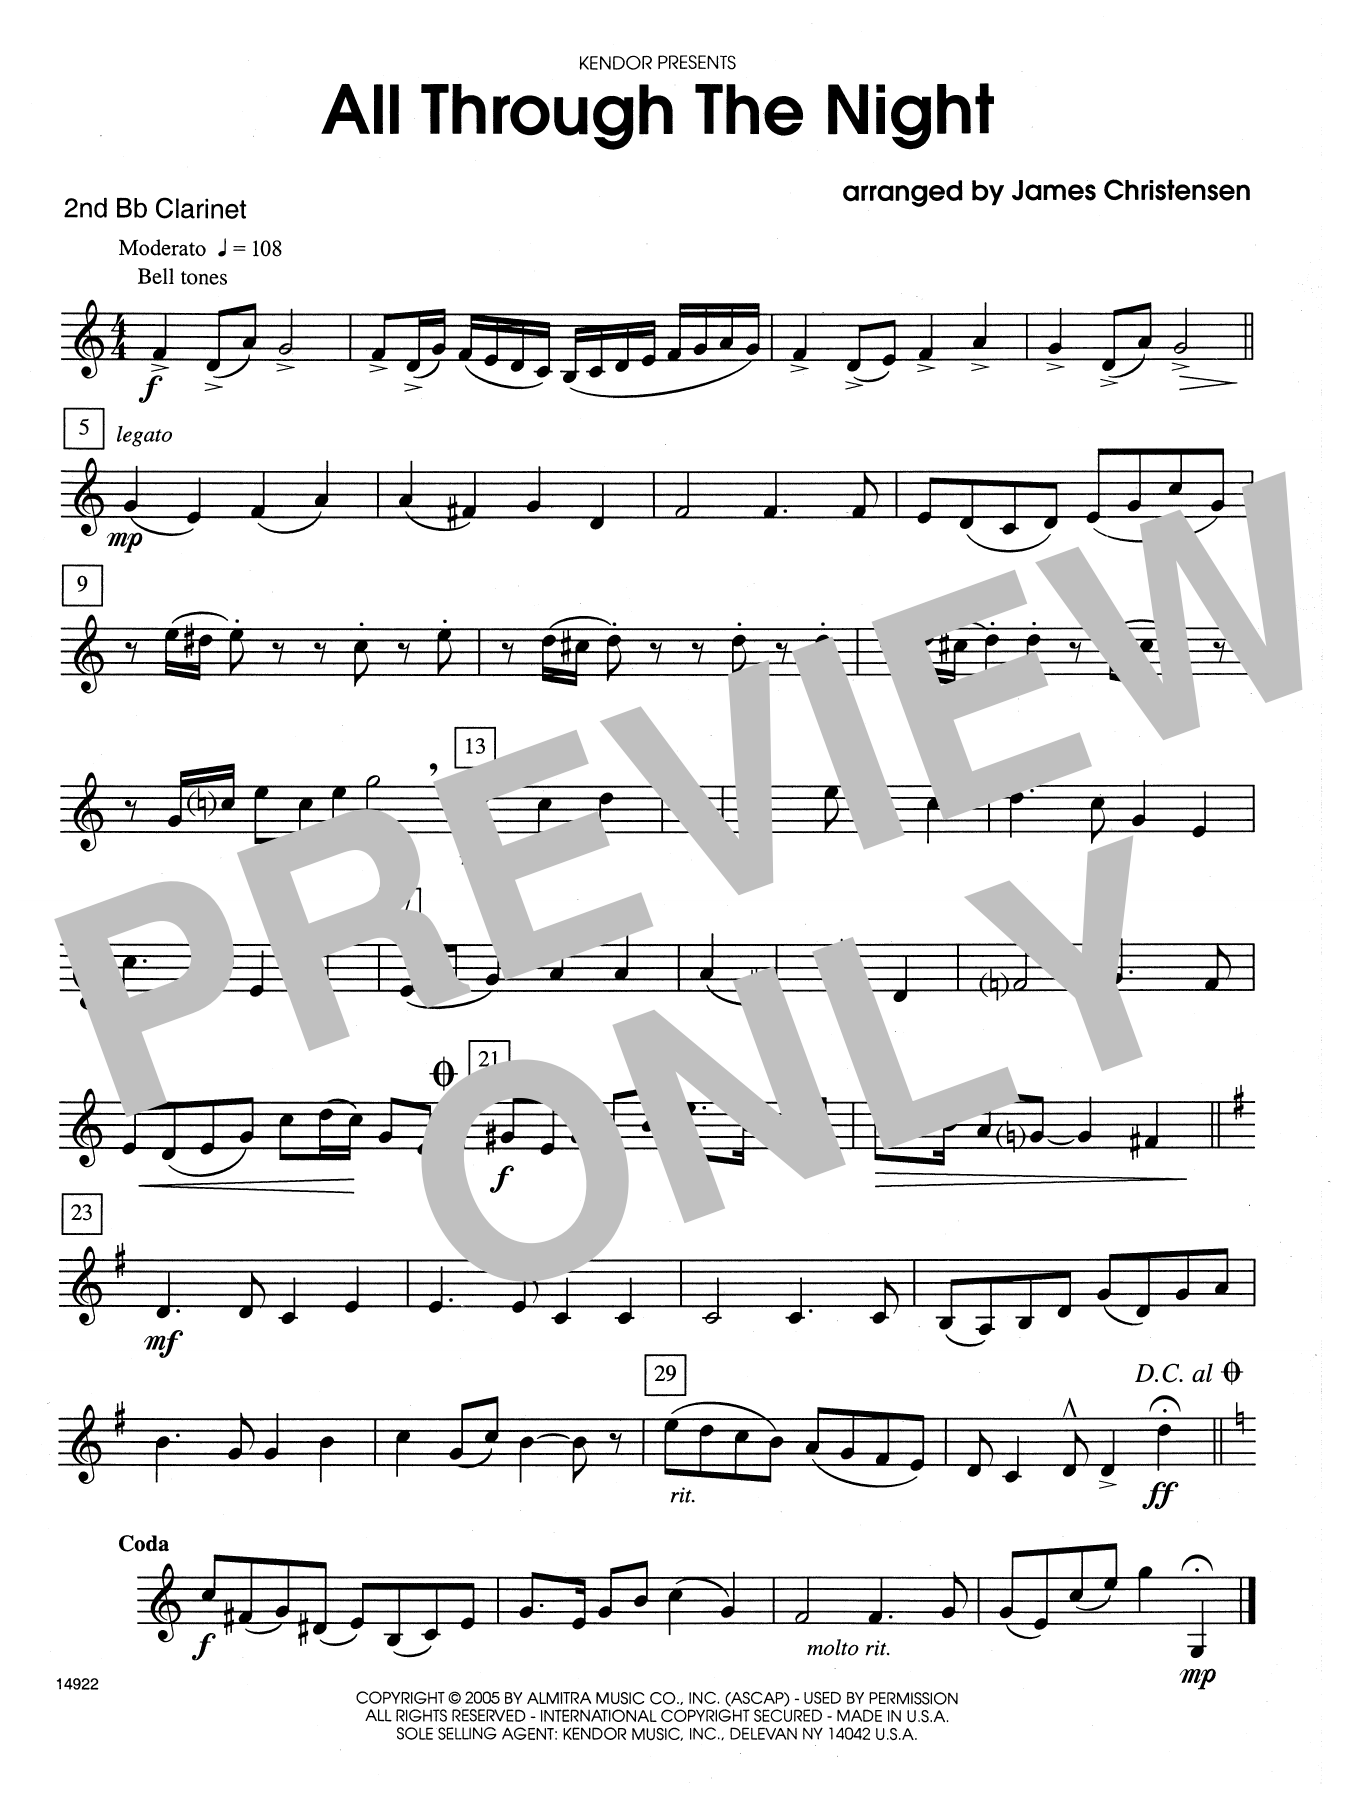 James Christensen All Through the Night - 2nd Bb Clarinet sheet music notes and chords. Download Printable PDF.